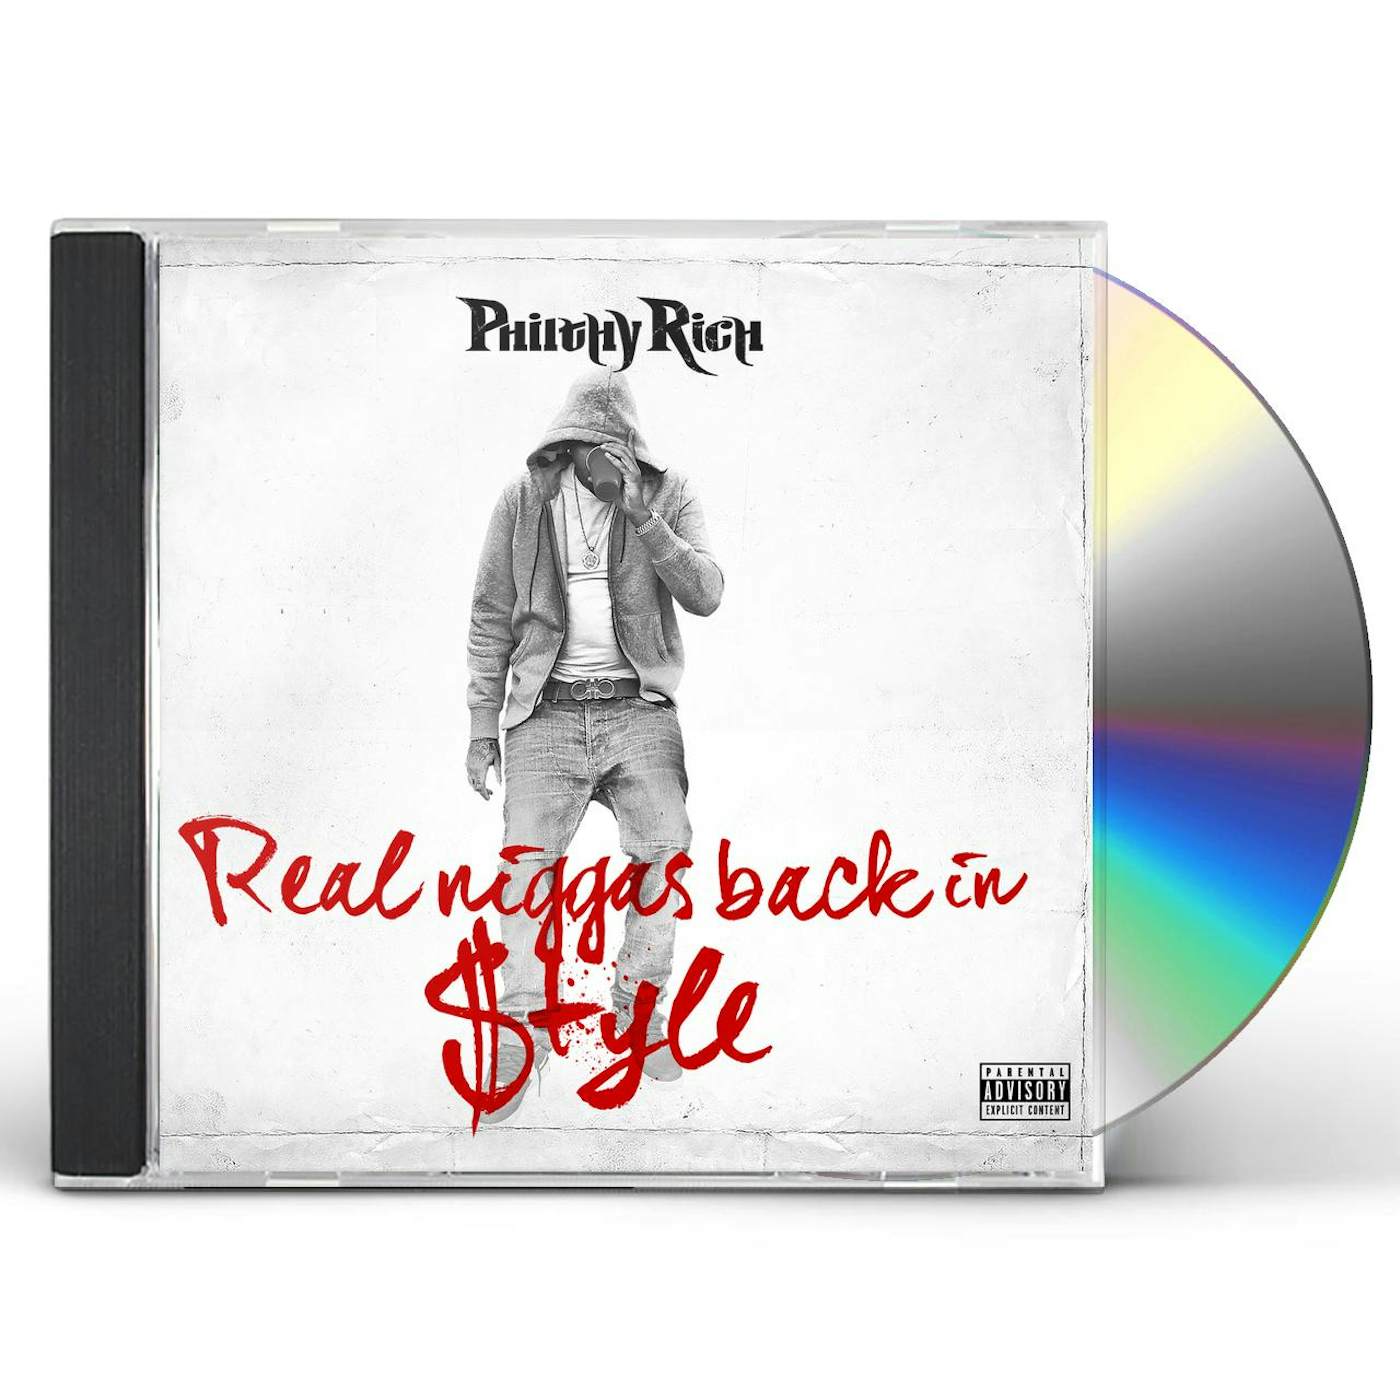 Philthy Rich REAL N-GGAS BACK IN STYLE CD